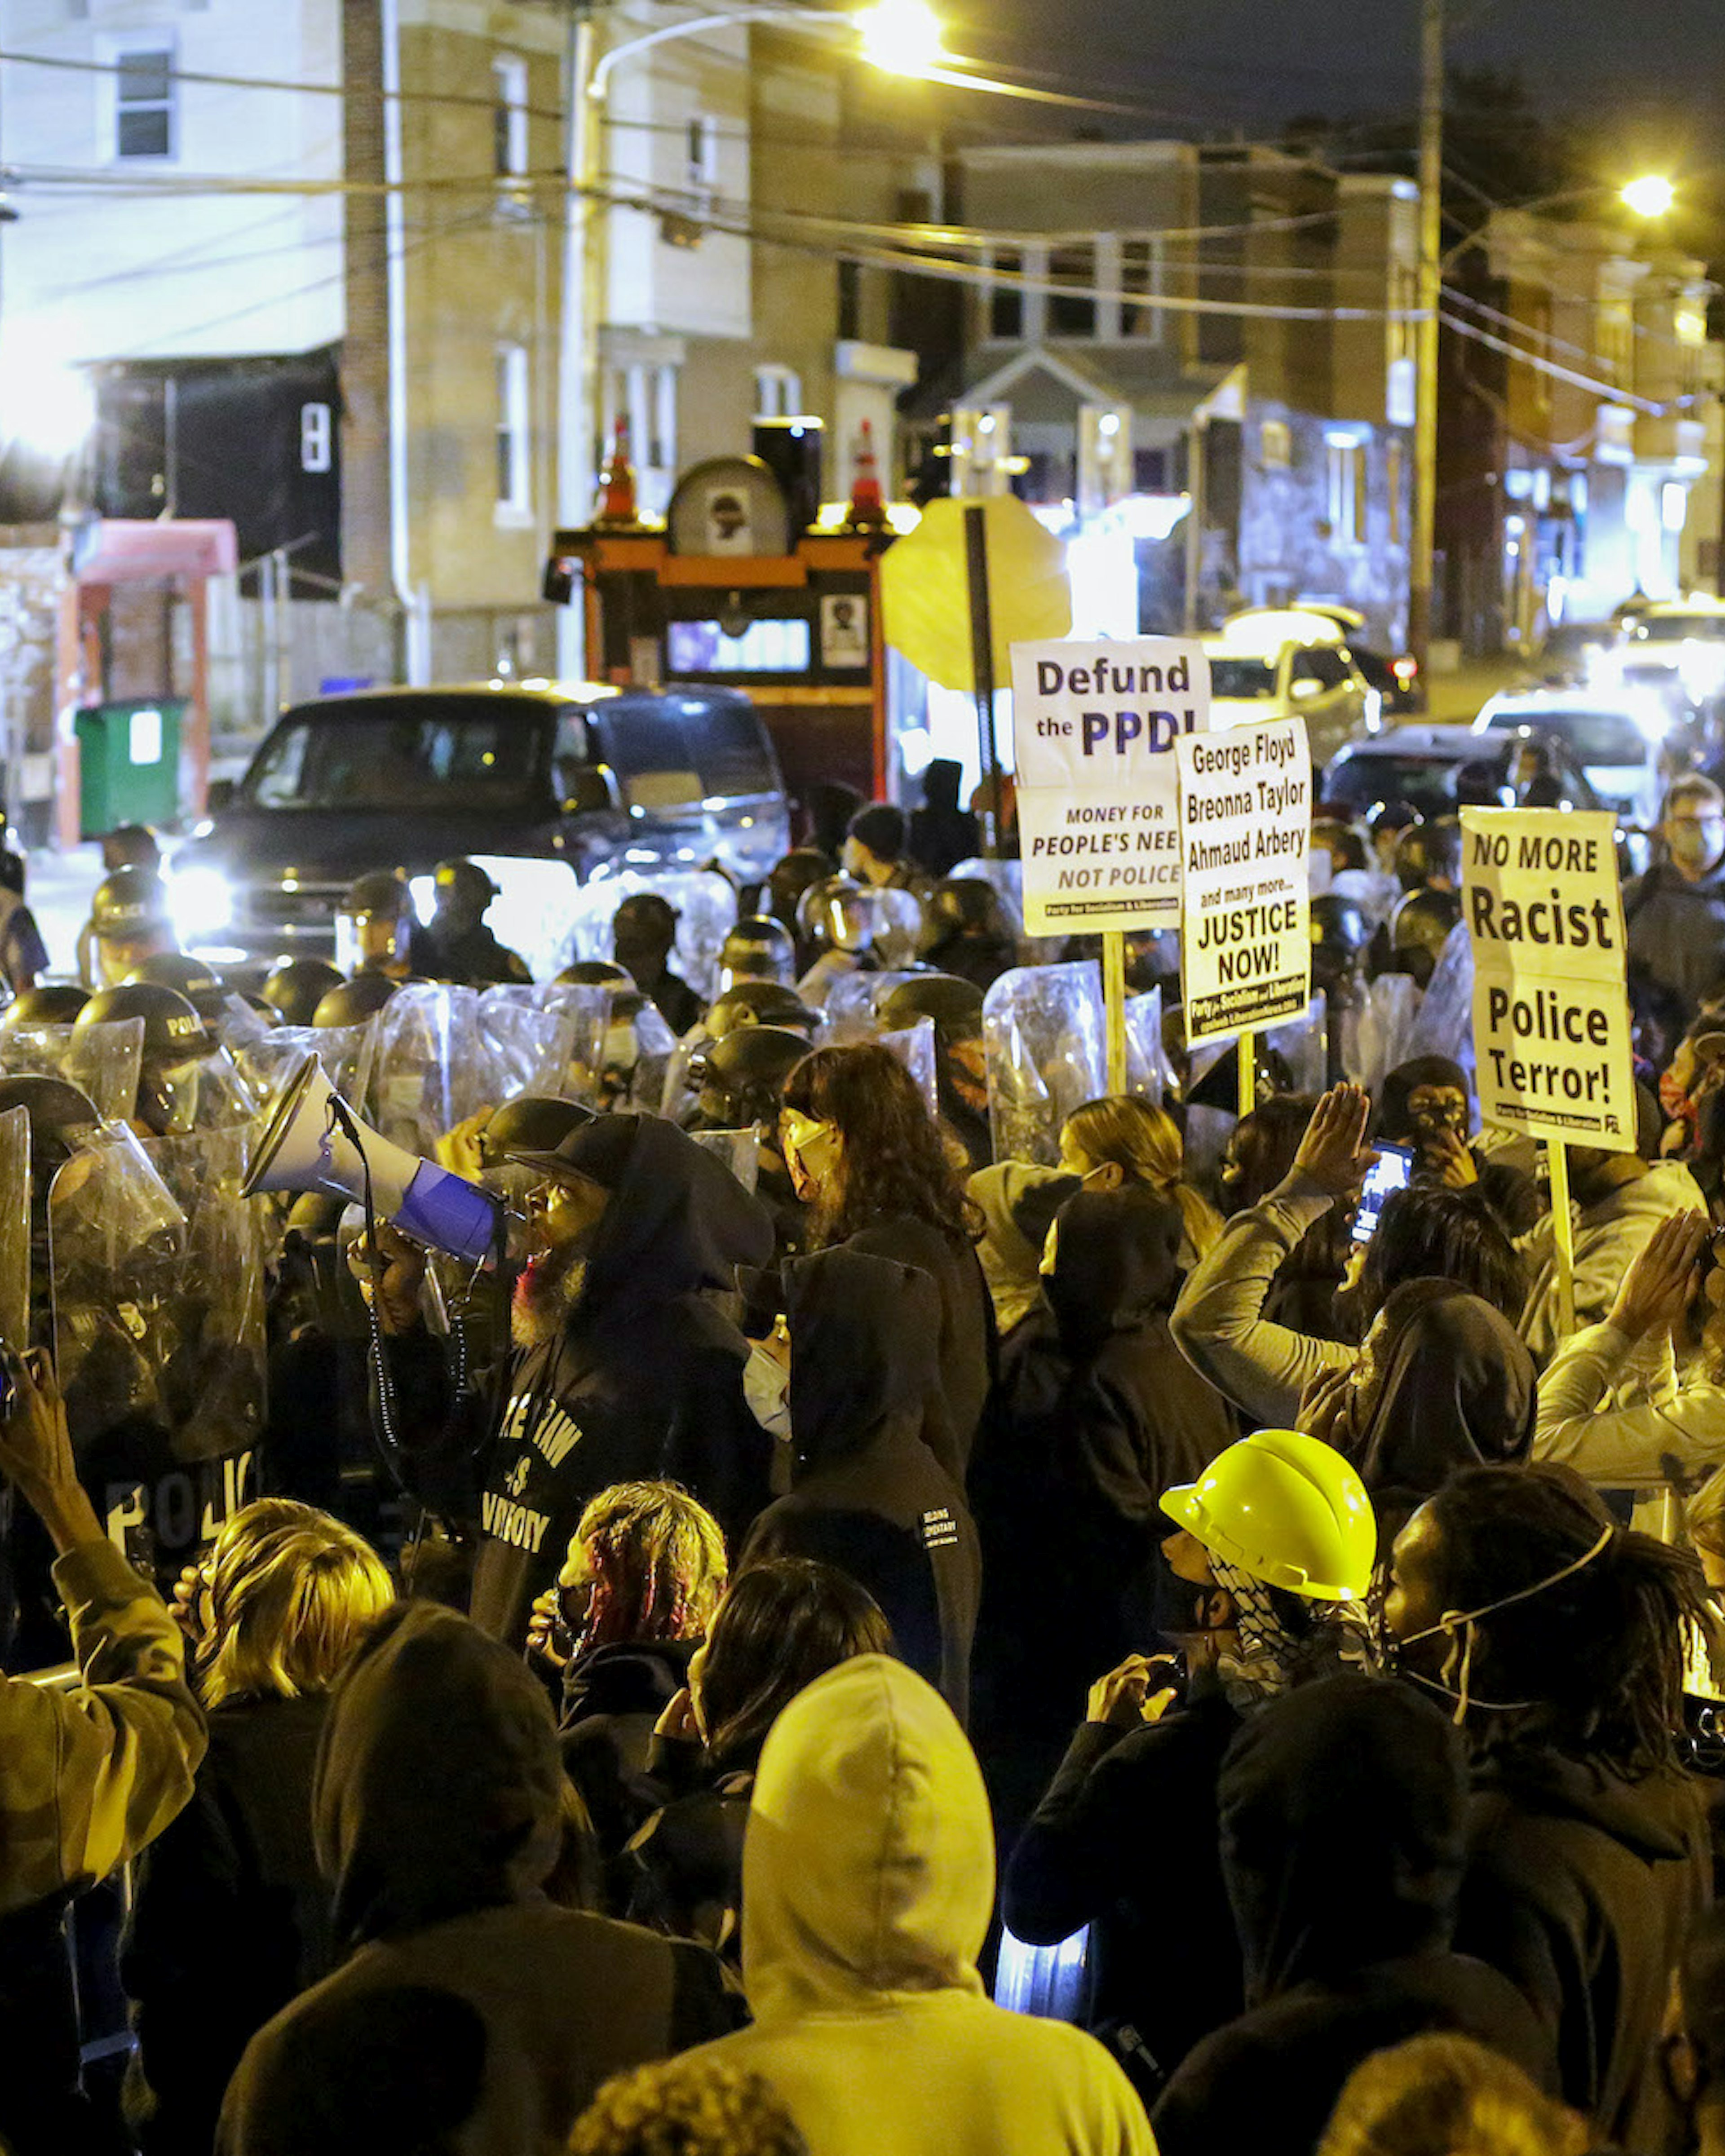 Demonstrators protest the fatal police shooting of Walter Wallace Jr. on October 27, 2020 in Philadelphia, Pennsylvania. Wallace Jr. was fatally shot by two Philadelphia police officers after refusing to drop a knife he was holding. (Photo by Joshua Lott/The Washington Post via Getty Images)